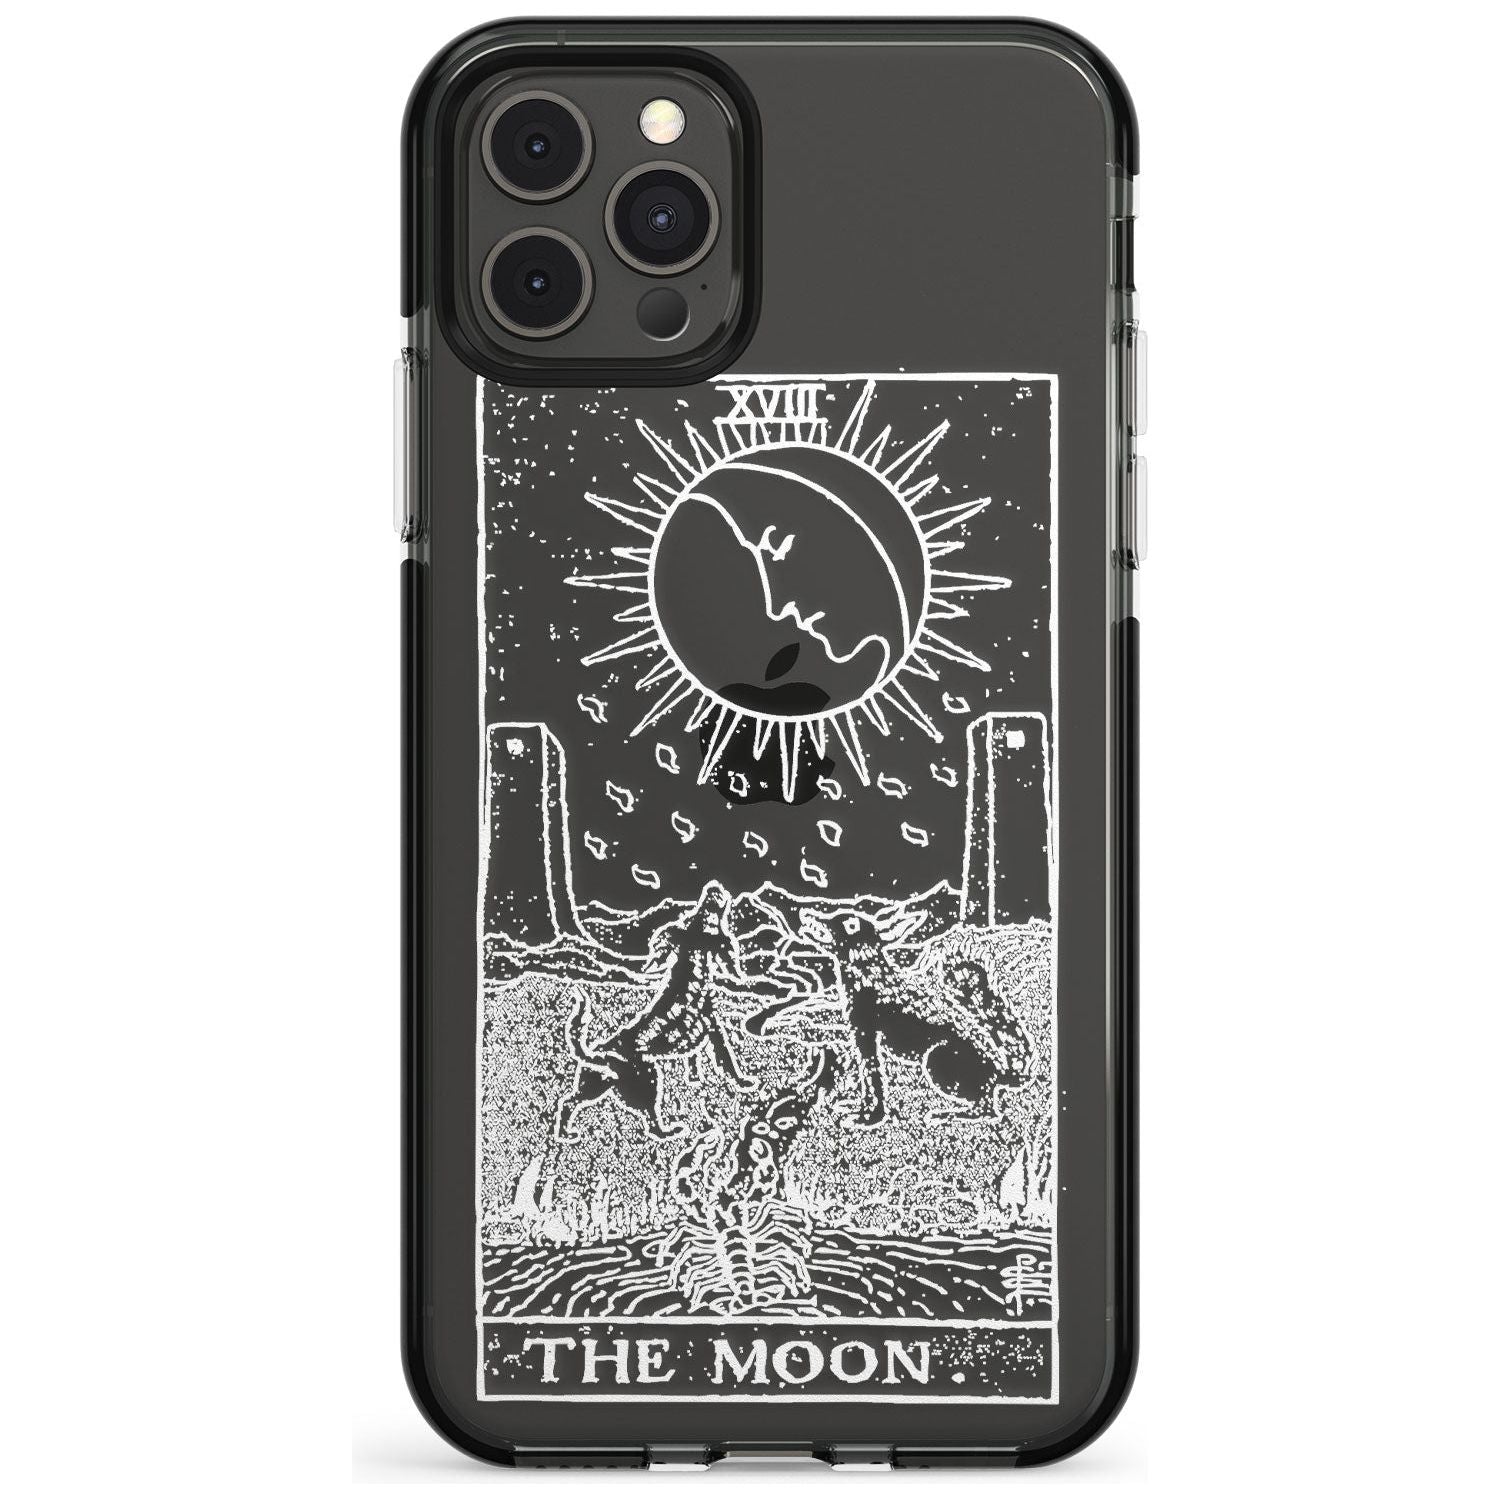 The Moon Tarot Card - White Transparent Pink Fade Impact Phone Case for iPhone 11